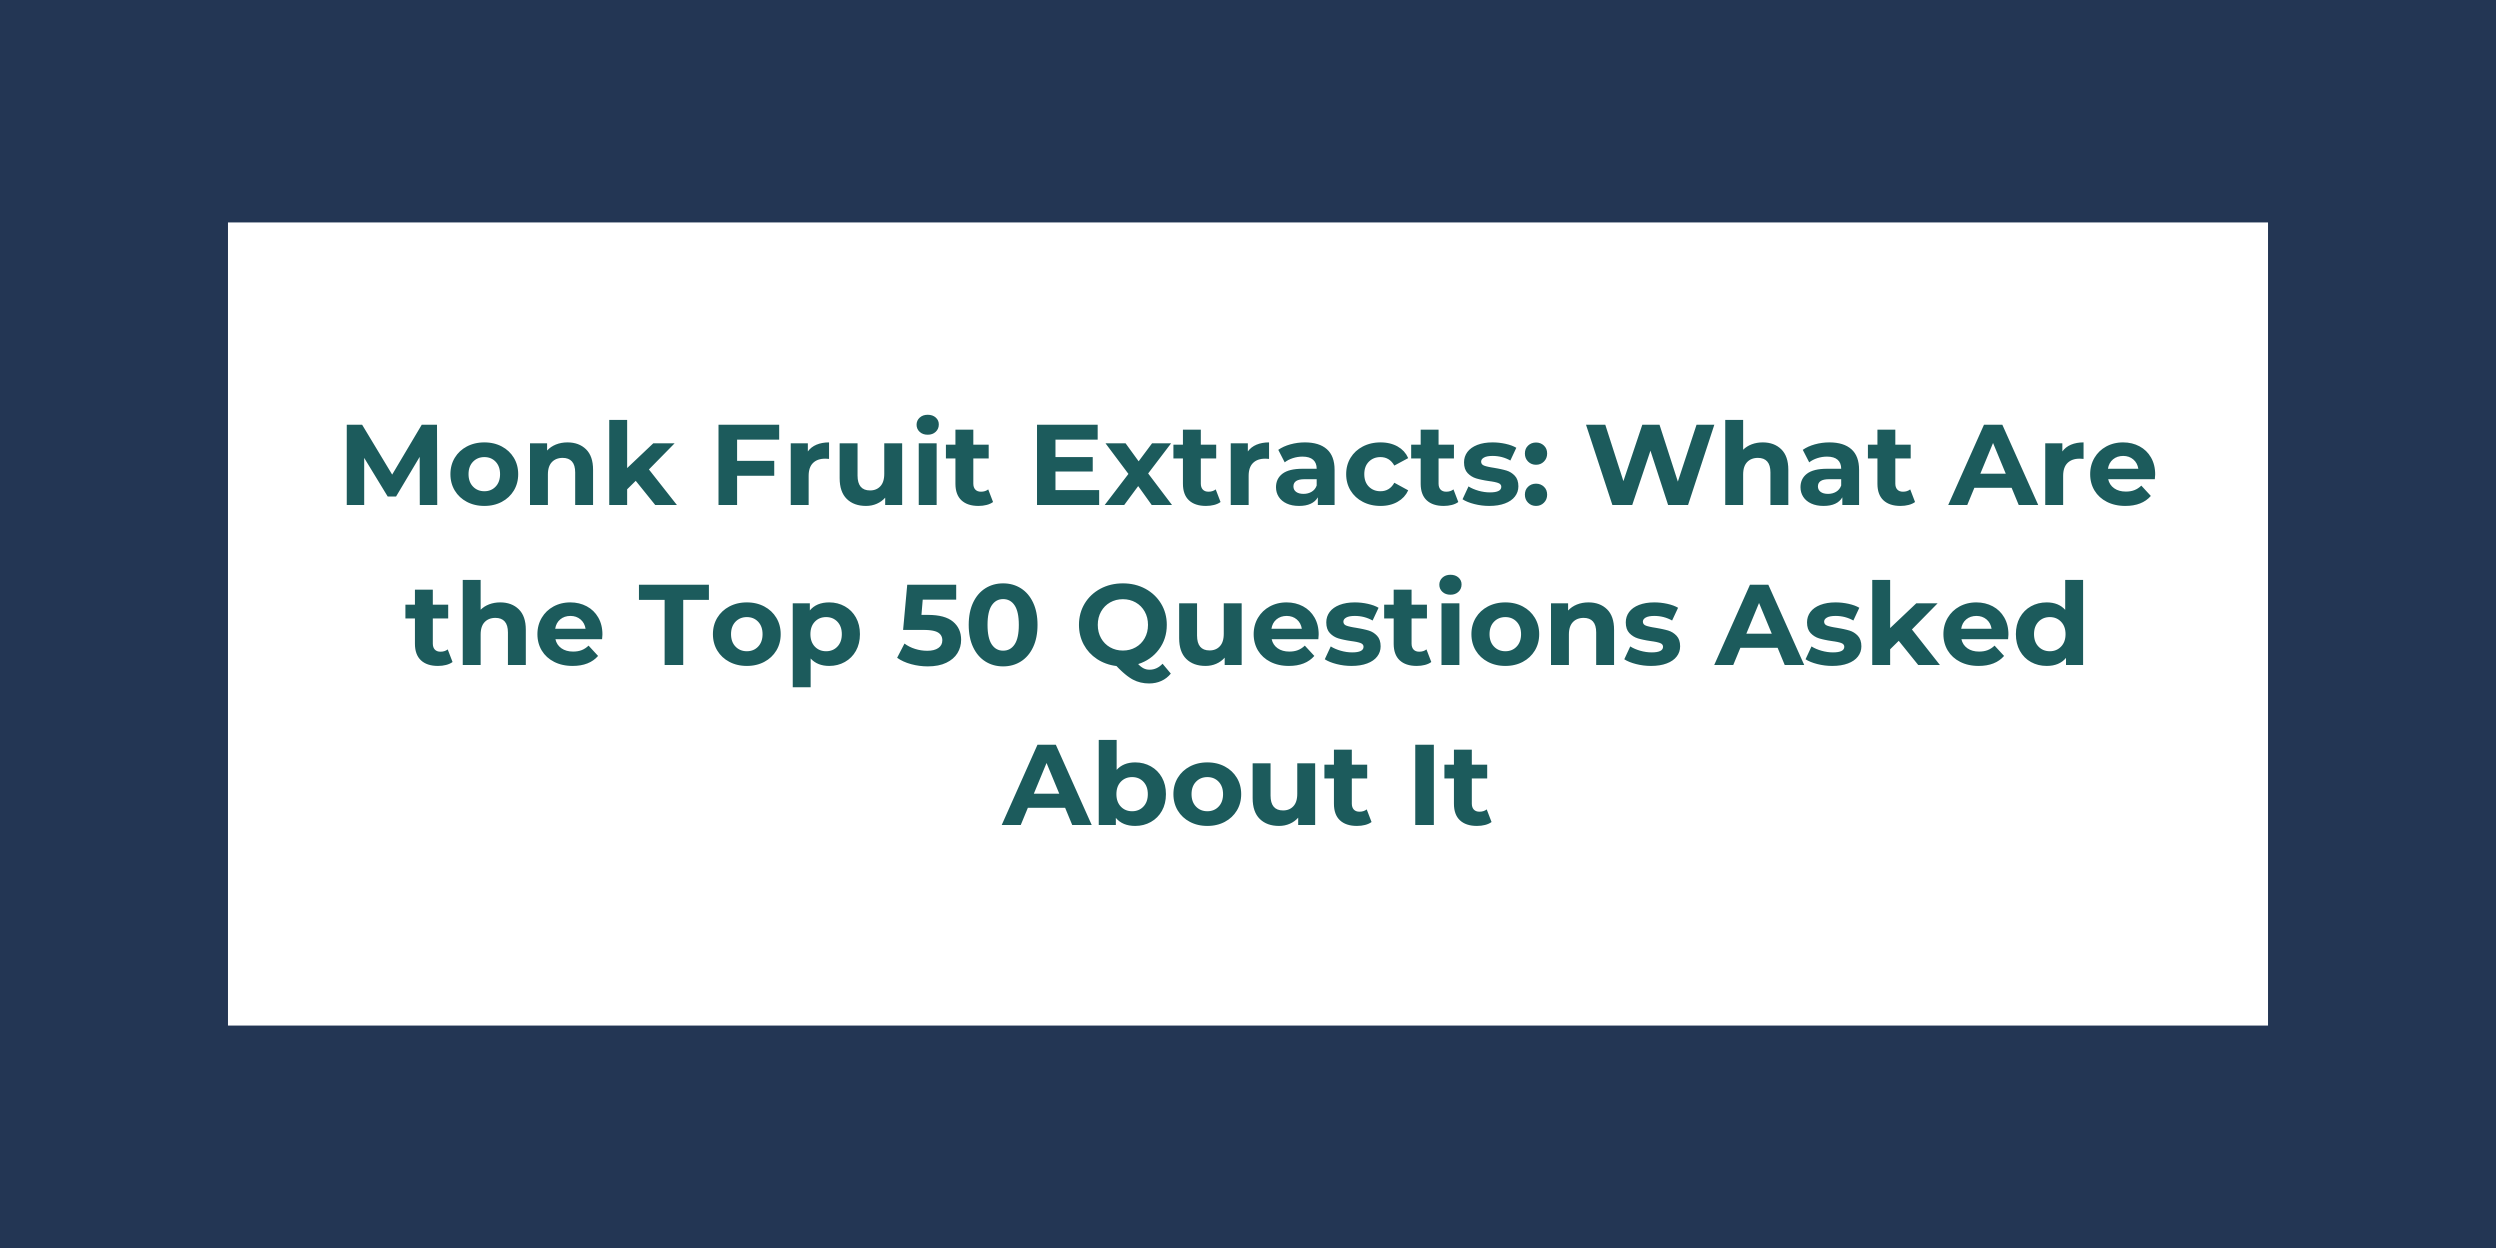 Monk Fruit Extracts: What Are the Top 50 Questions Asked About It